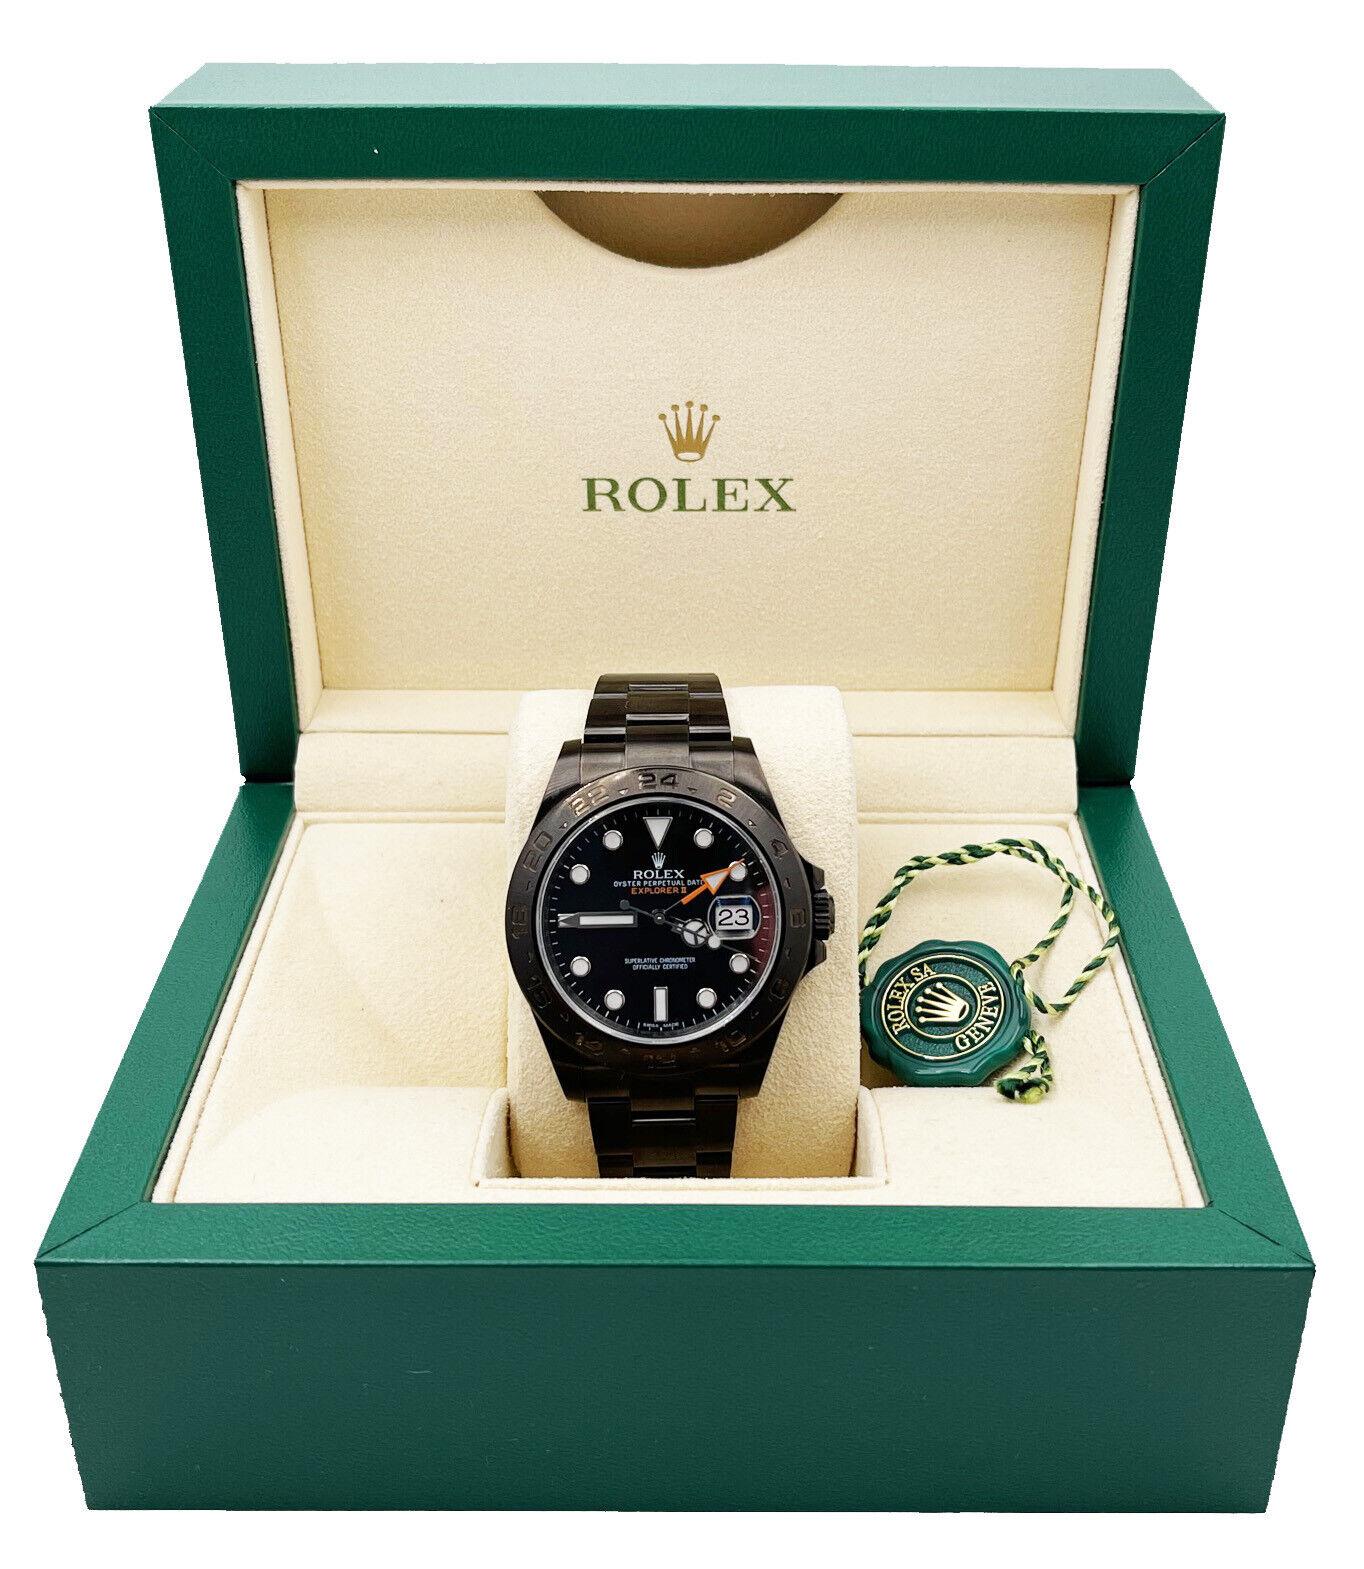 Rolex Explorer II 216570 Black Dial Black PVD Stainless Steel Box Booklet In Excellent Condition For Sale In San Diego, CA